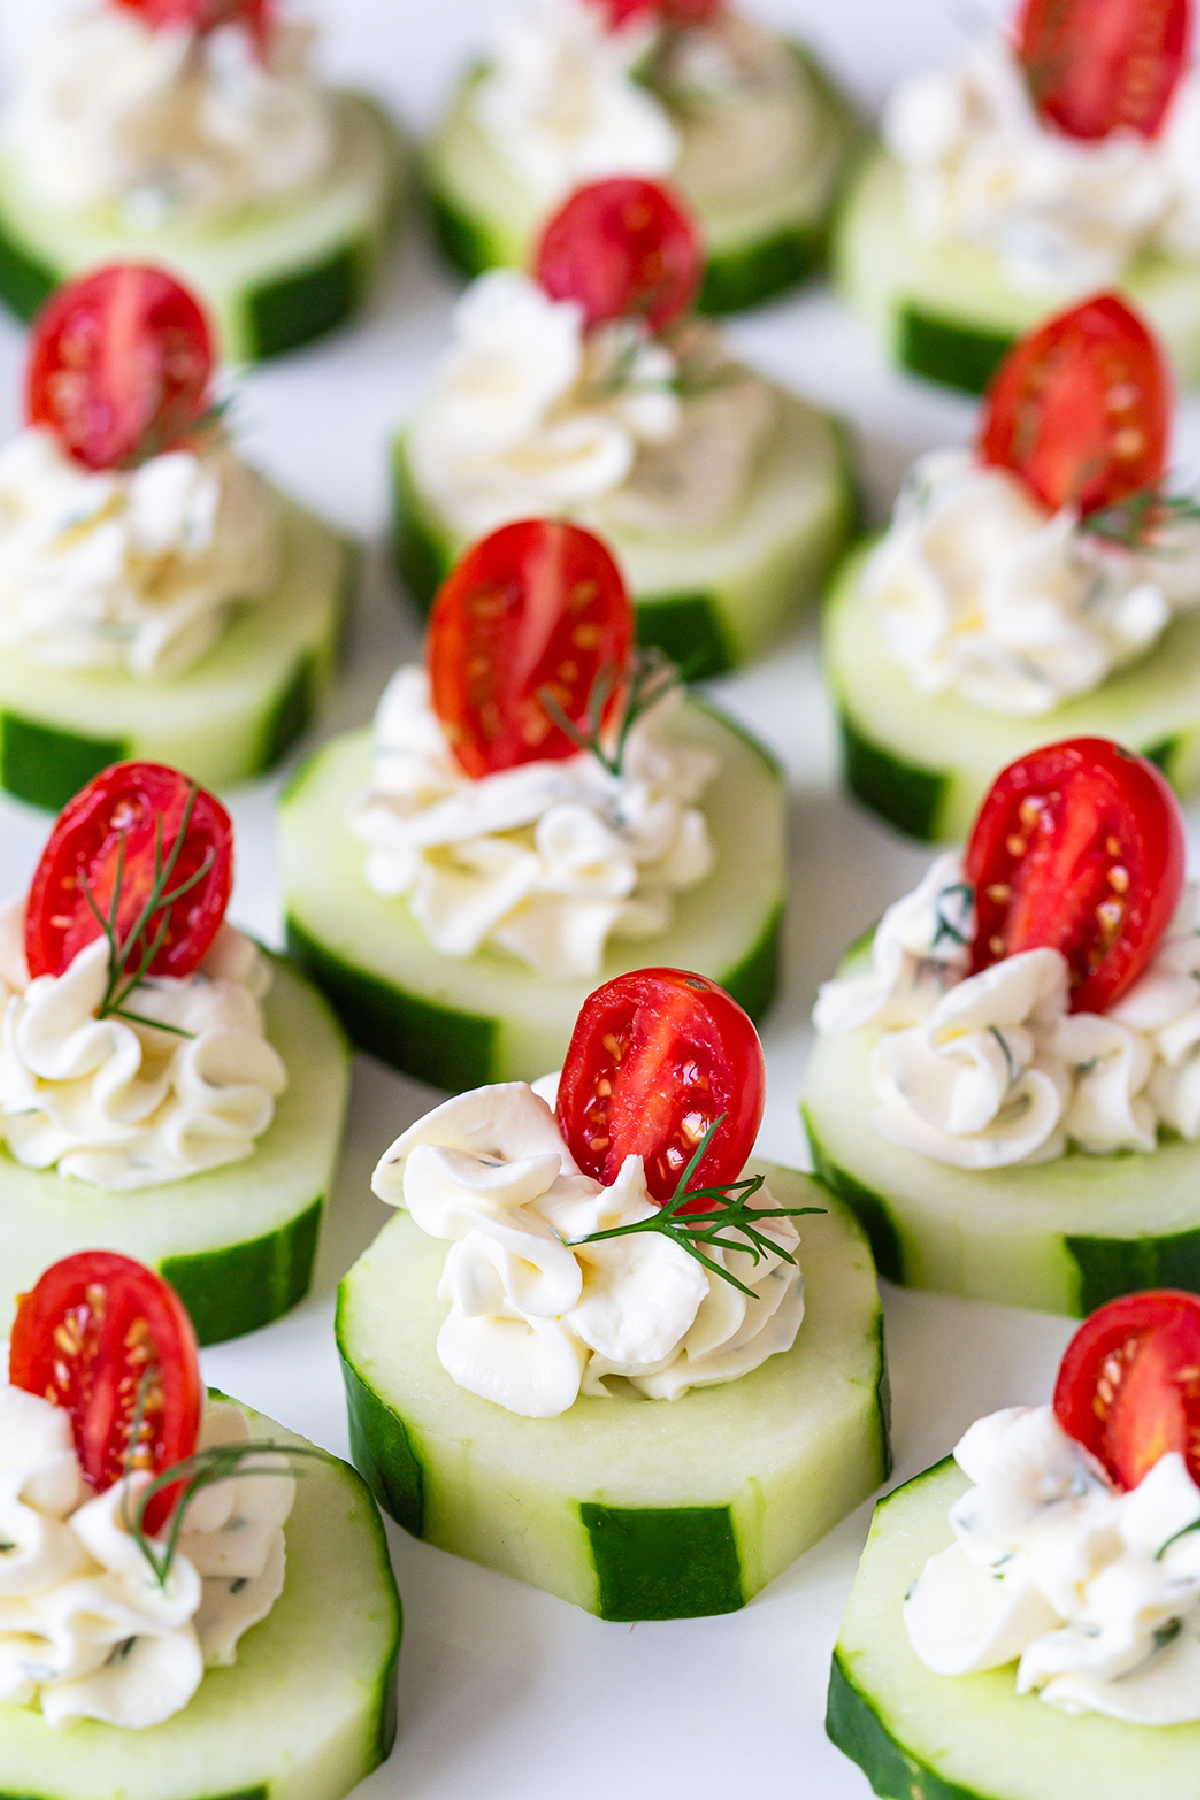 Cheap Party Food Ideas - Cucumber and Cream Cheese Bites